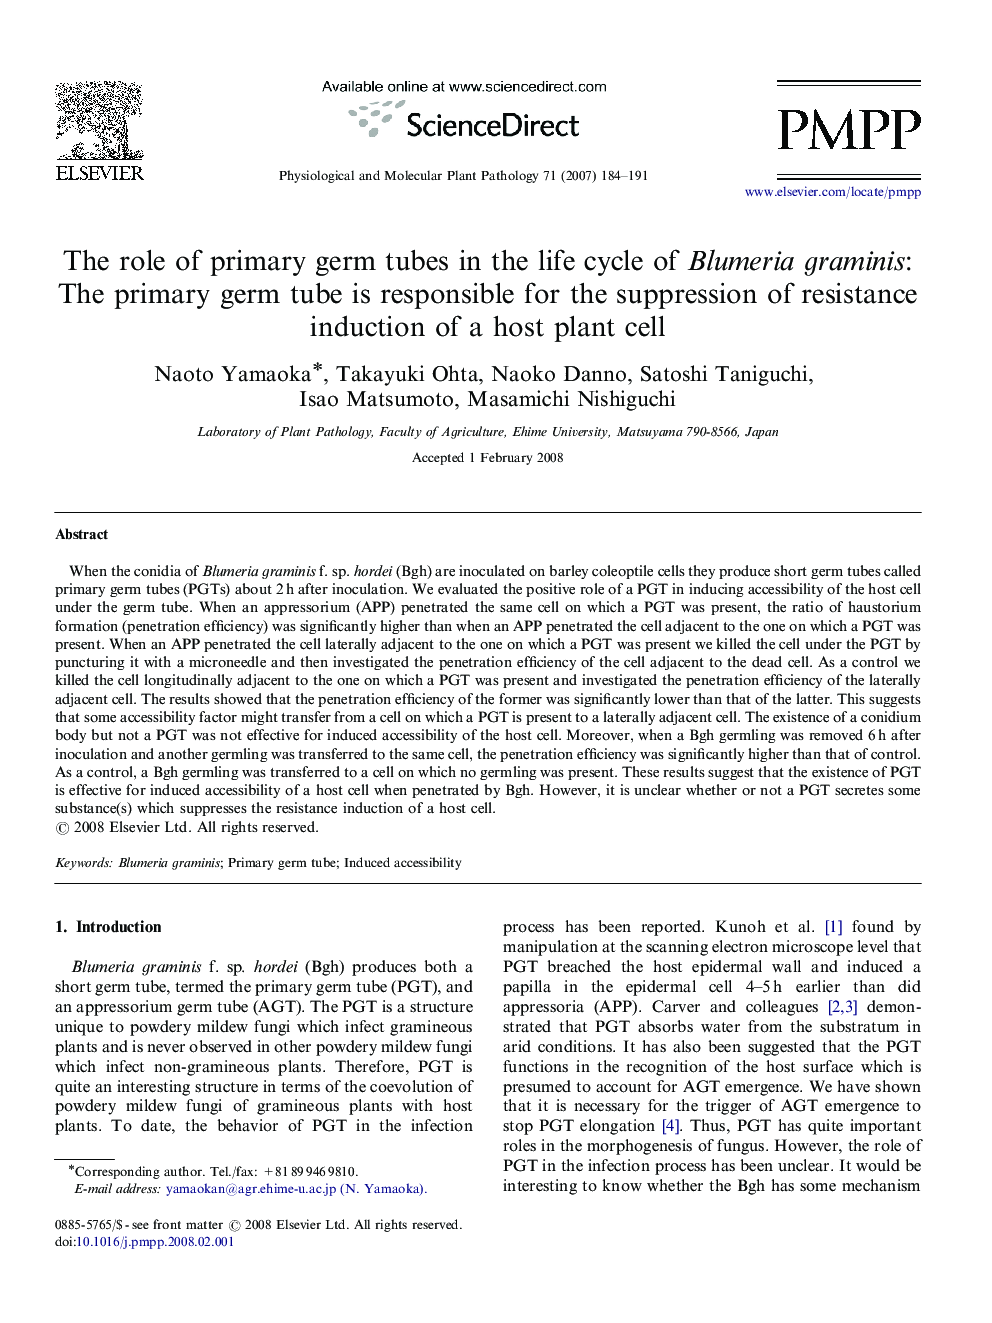 The role of primary germ tubes in the life cycle of Blumeria graminis: The primary germ tube is responsible for the suppression of resistance induction of a host plant cell